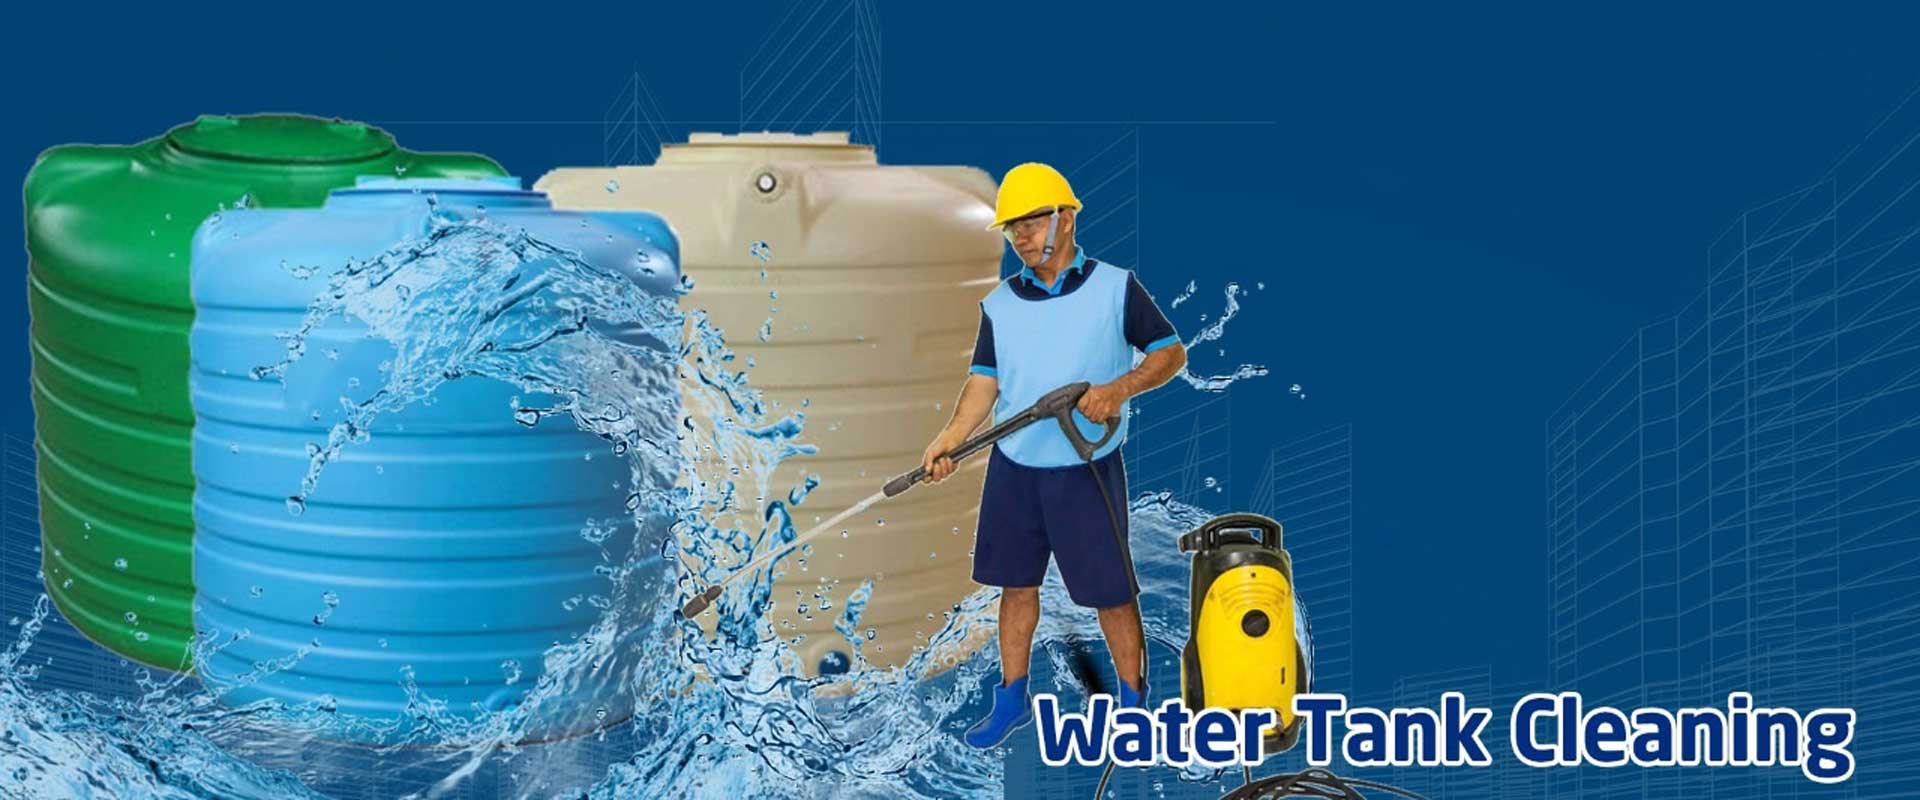 Water Tank Cleaning Services Jamshedpur